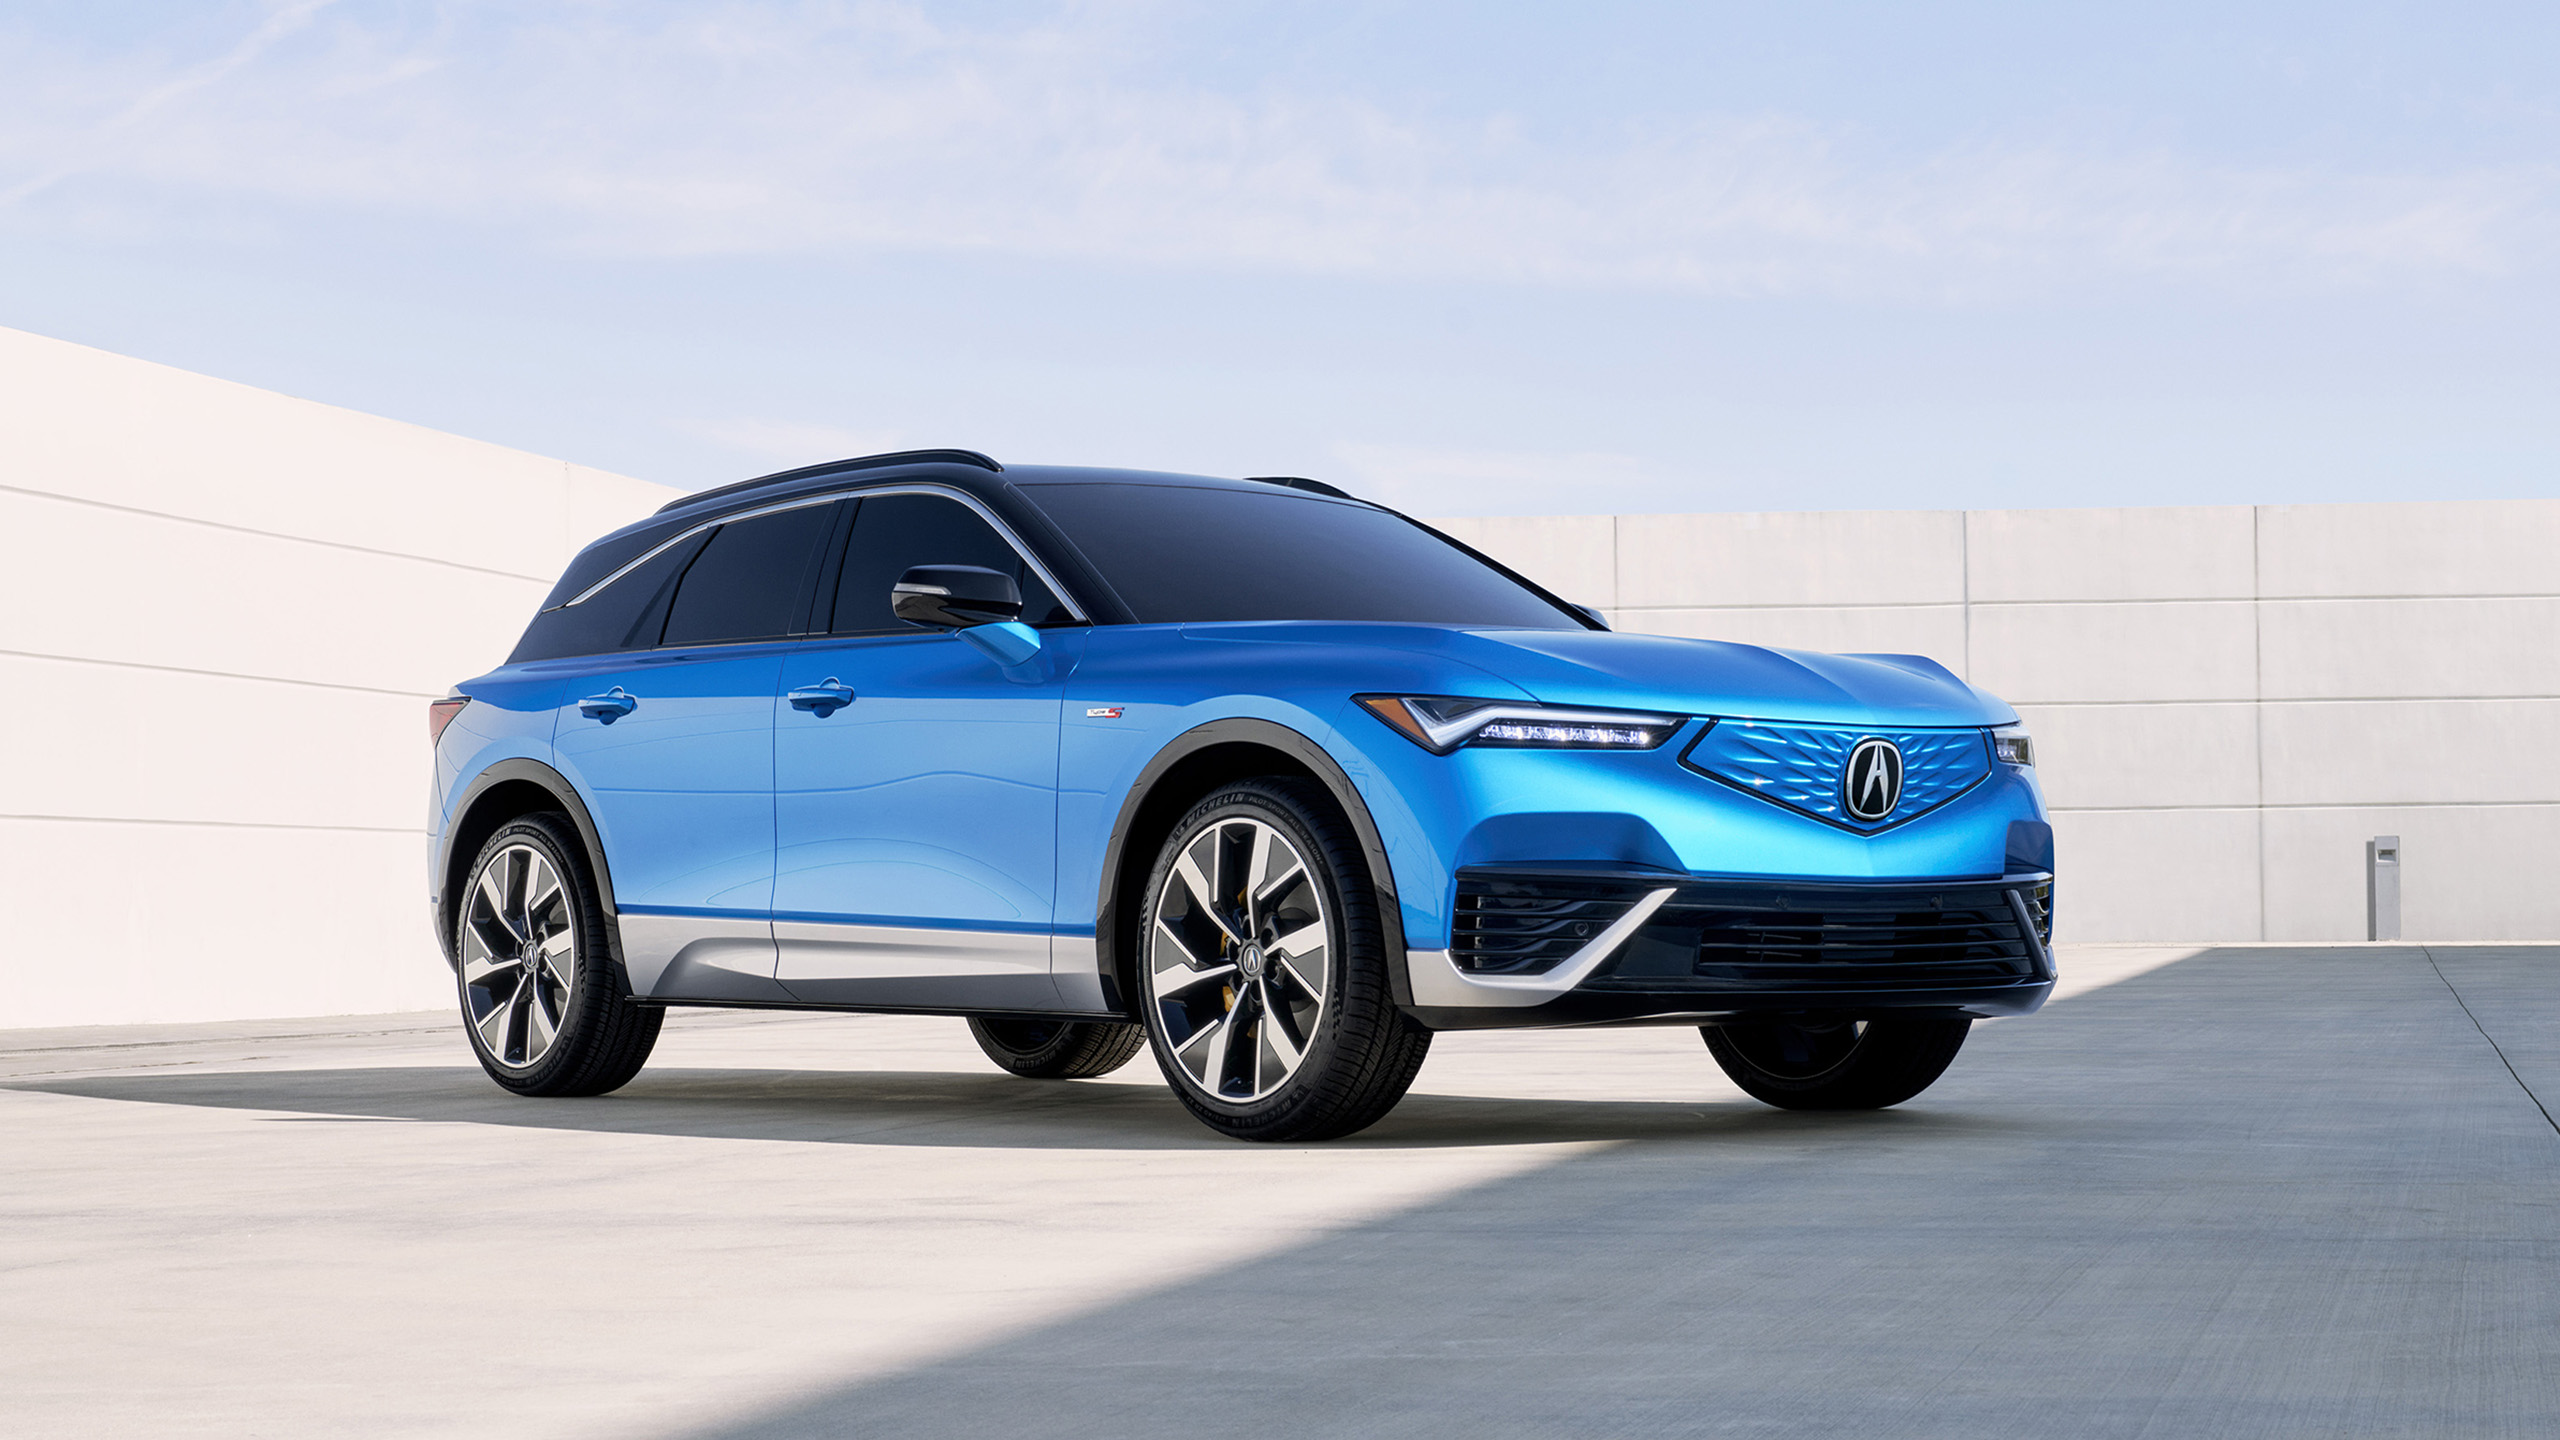 2024 Acura ZDX Revealed: Acura’s First EV Has Premium Looks, Up to 500 HP